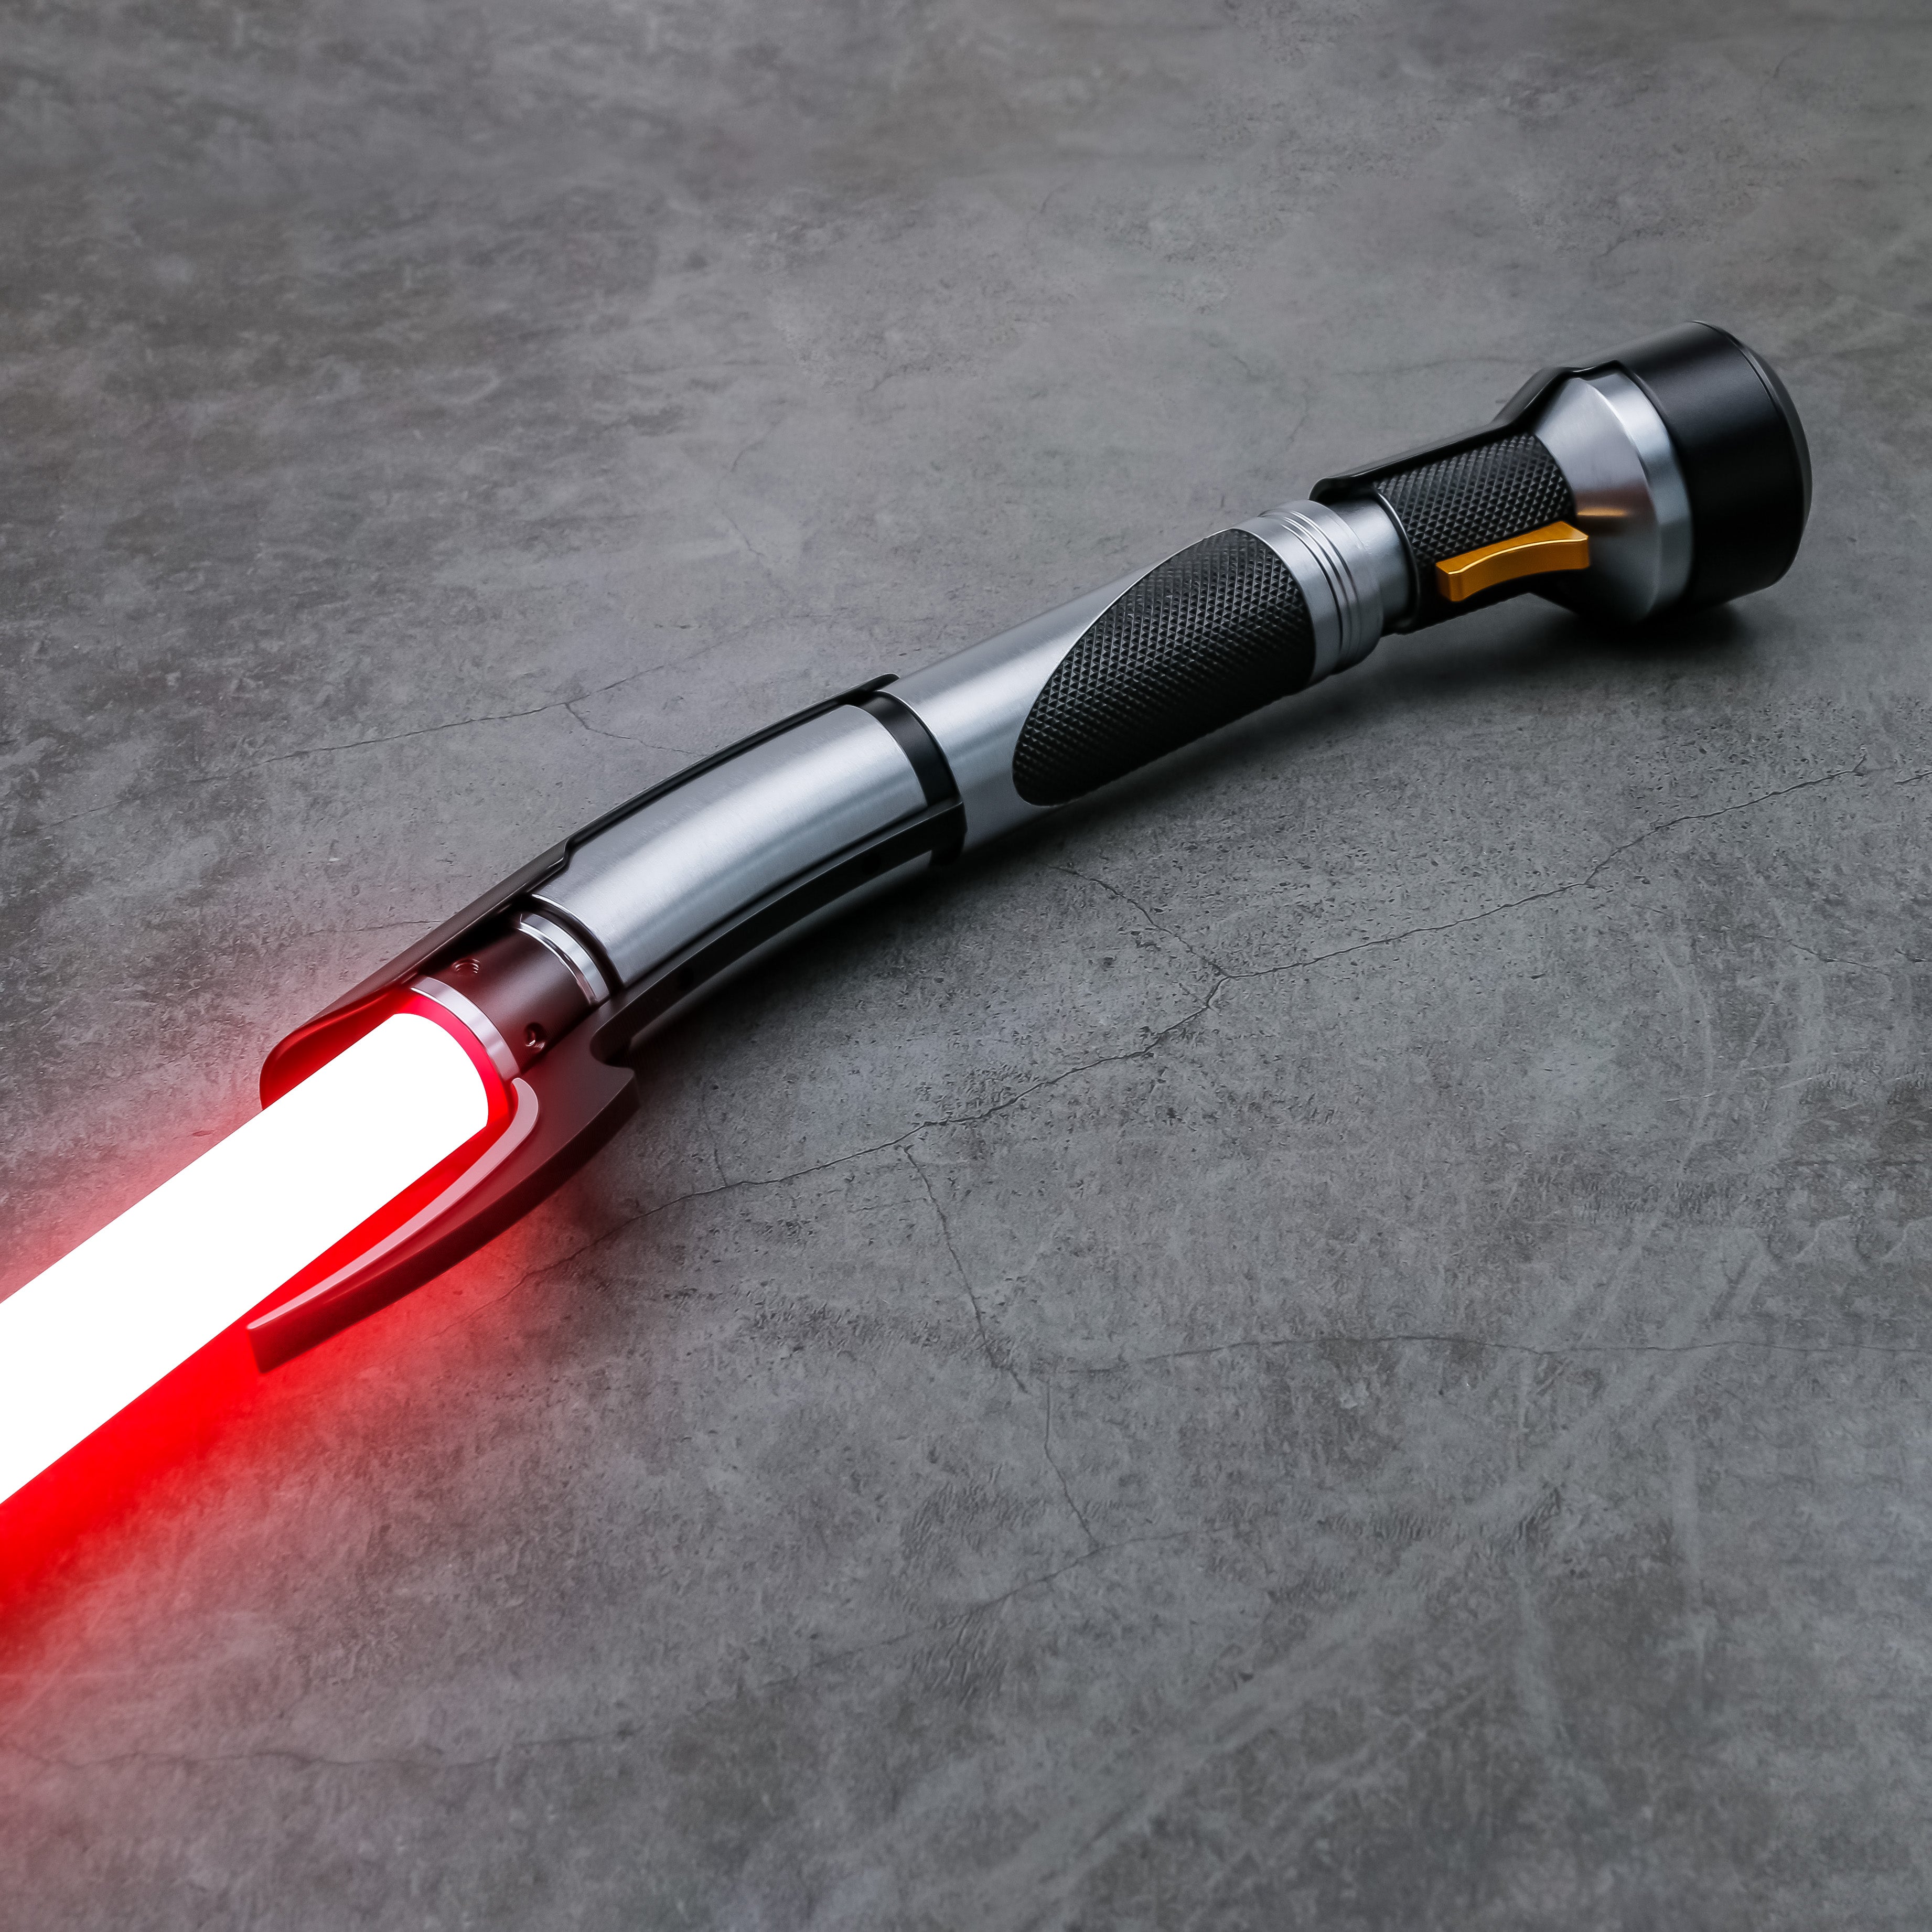 Count Dooku curved red lightsaber